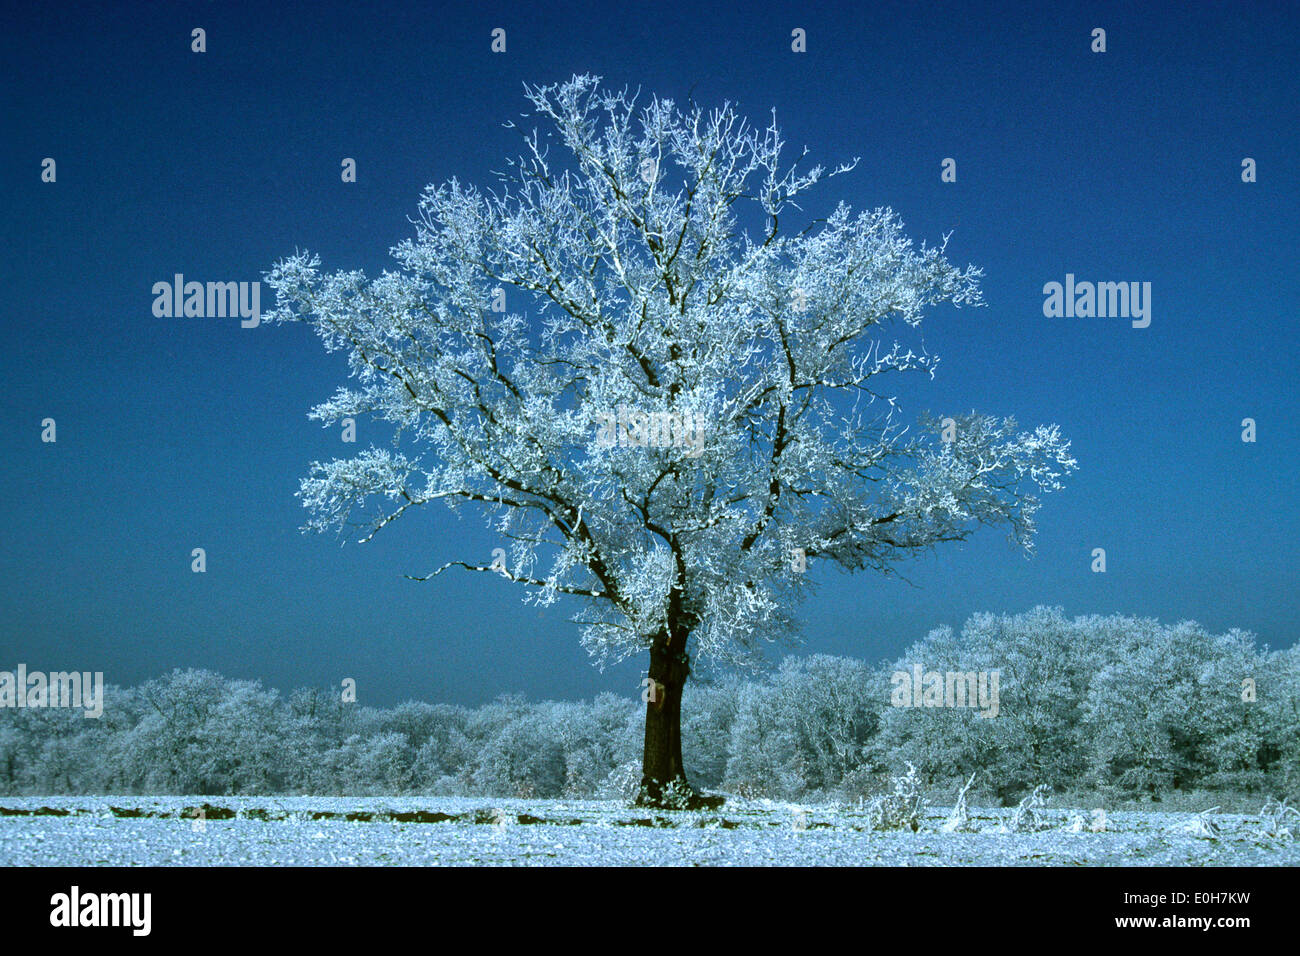 Oak tree in winter scene at dawn Banque D'Images